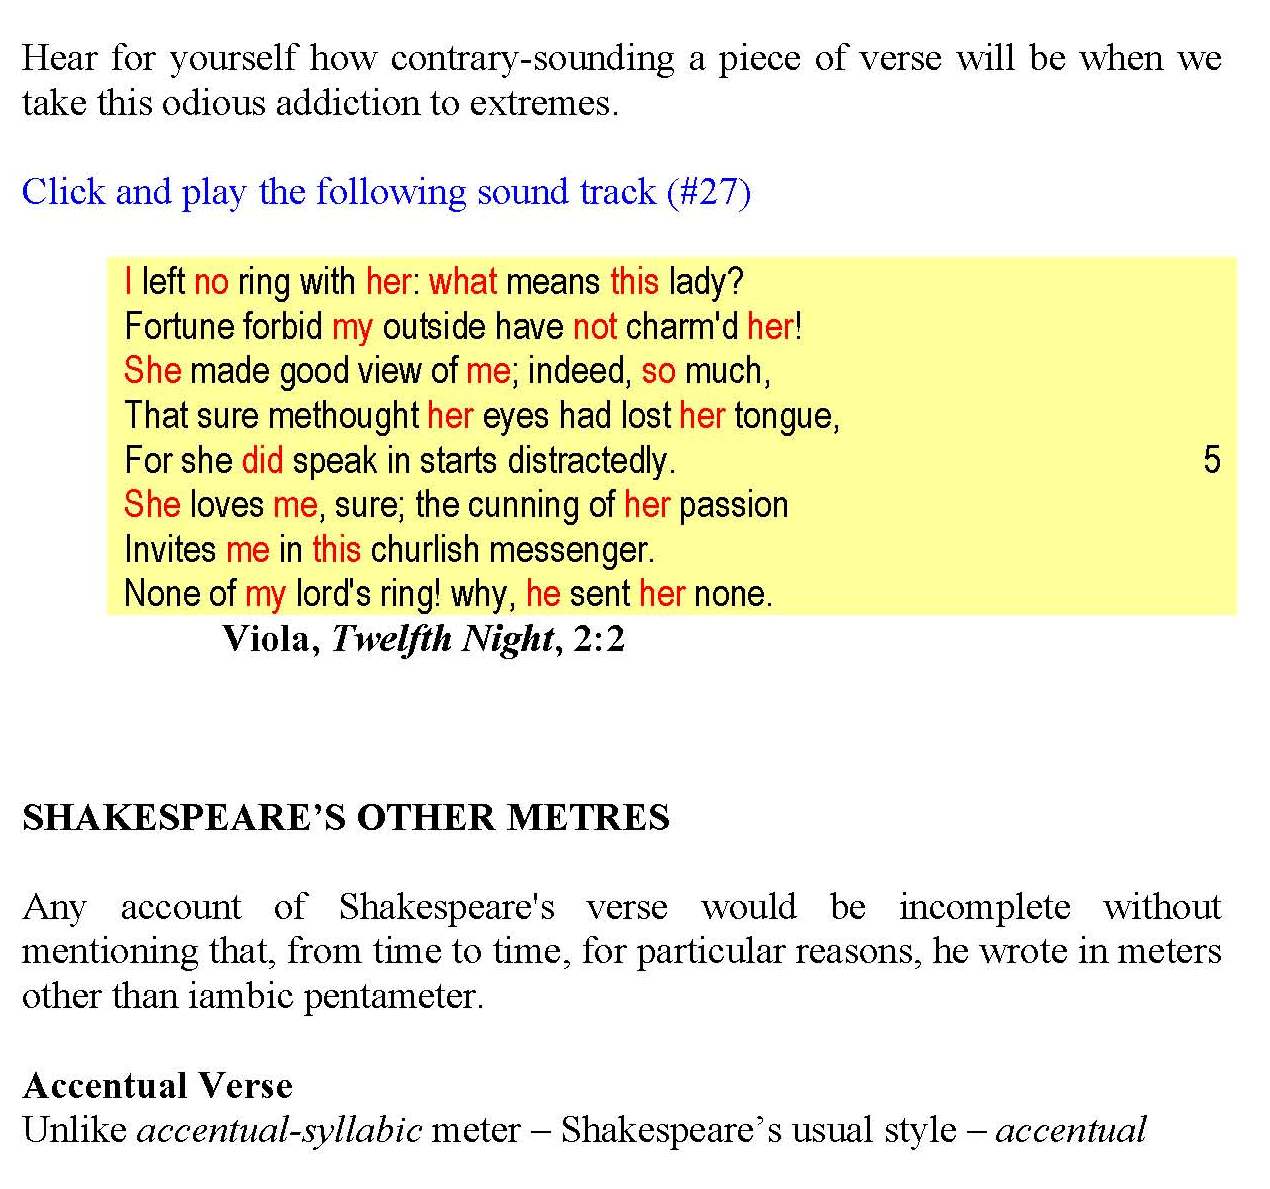 shakespearean e with an accent mark